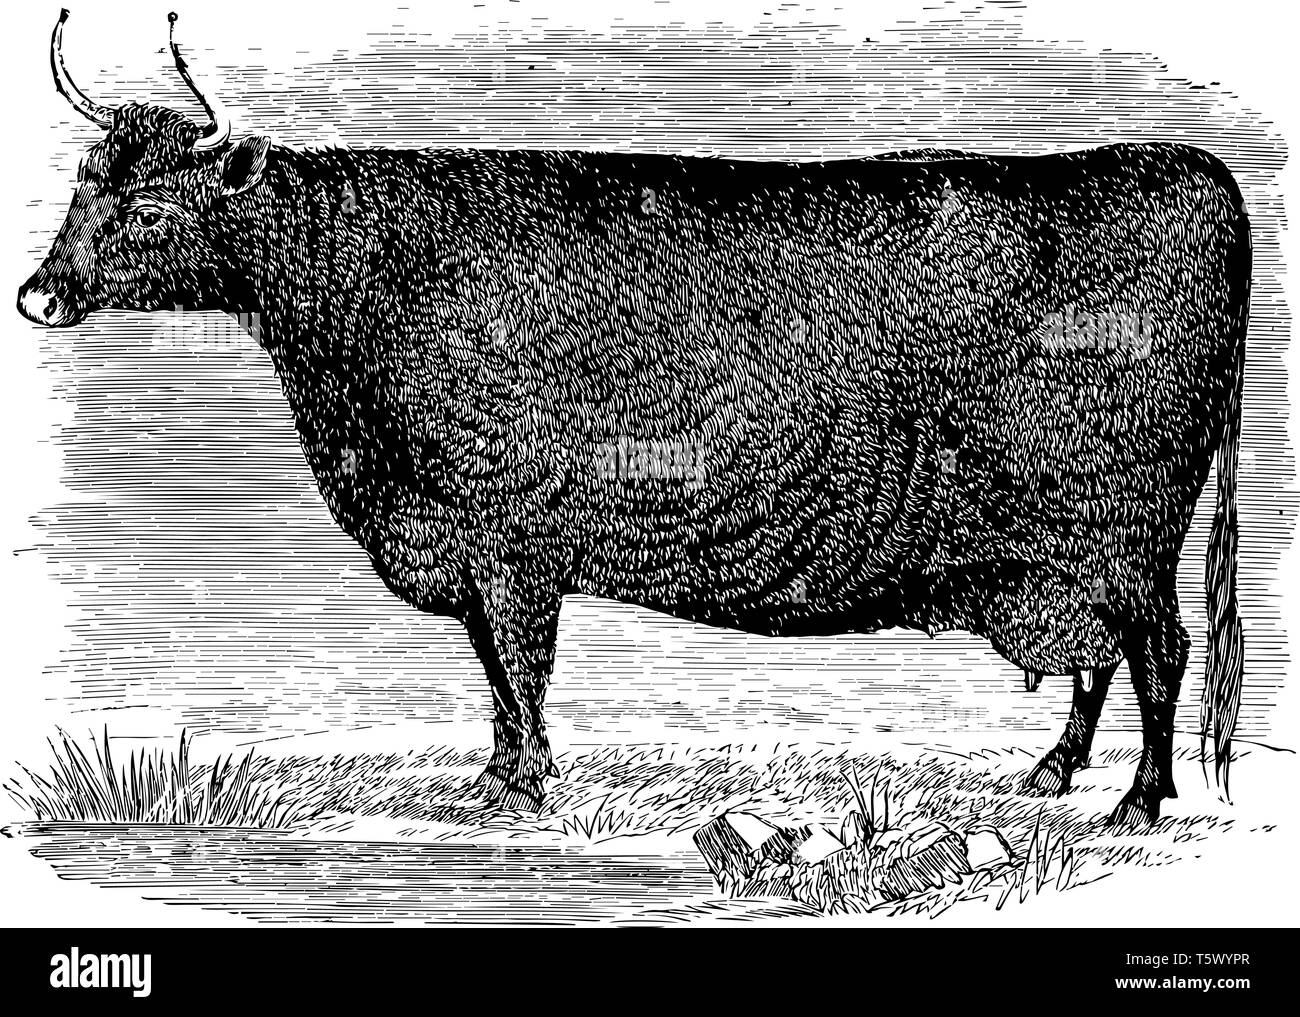 Cow Coloring Images  Free Download on Freepik